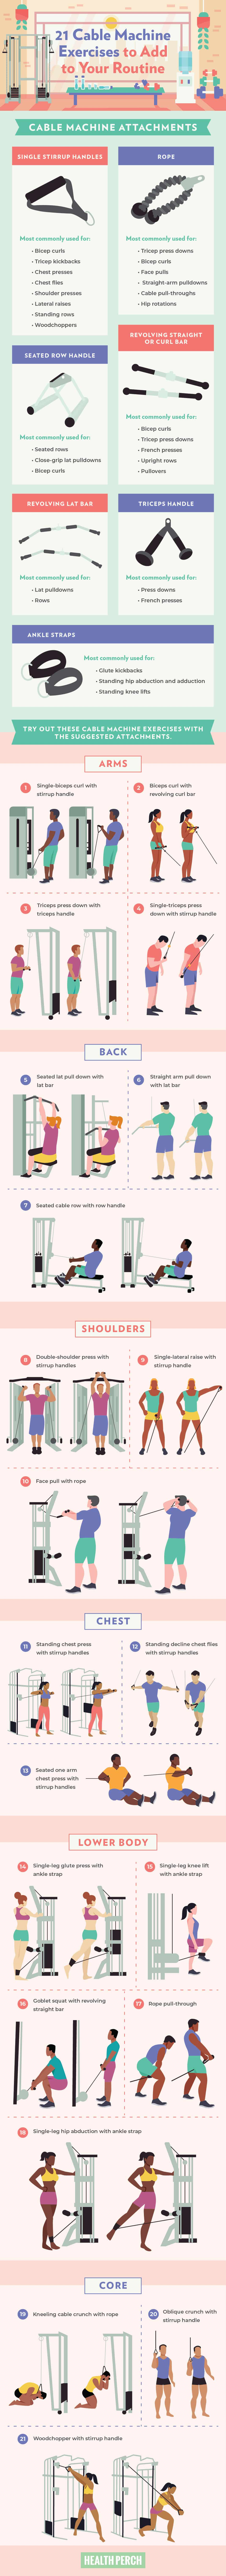 Here’s How to Build the Cable Machine into Workout Routines